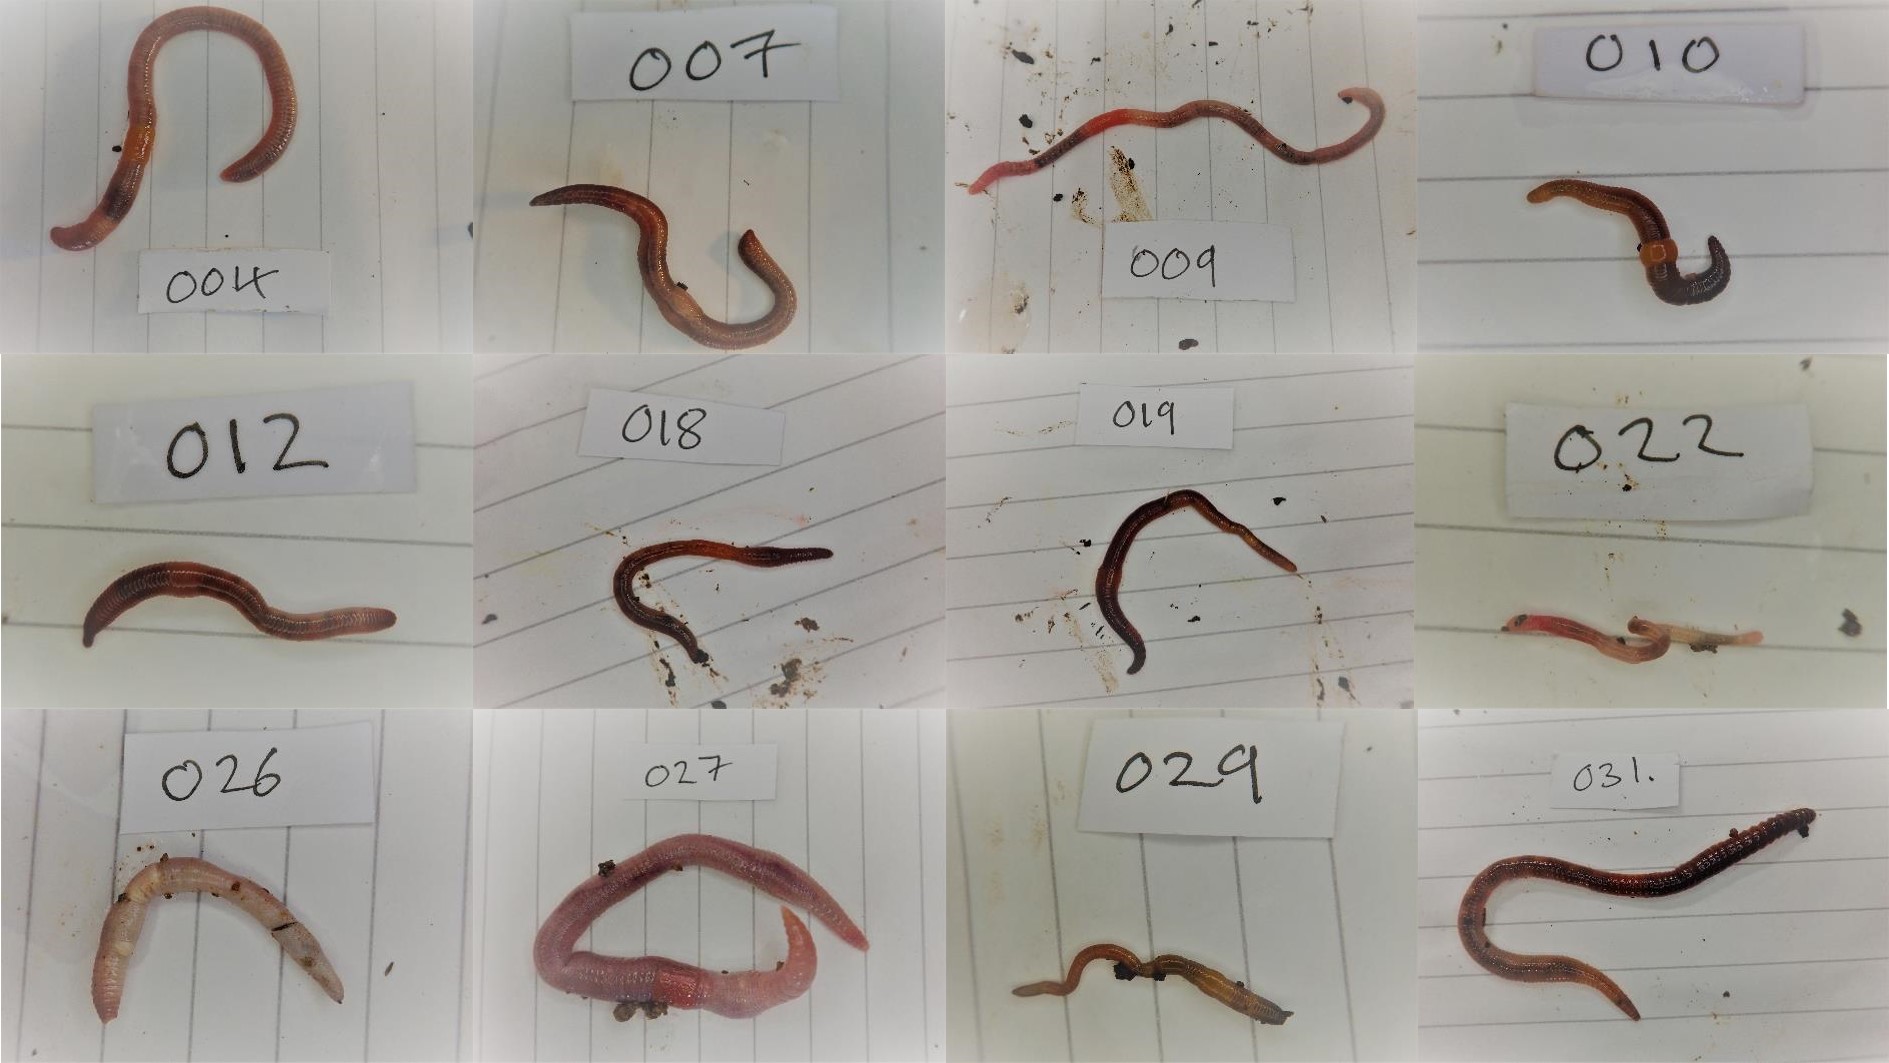 Sequencing the earthworms of Wytham Woods – Darwin Tree of Life